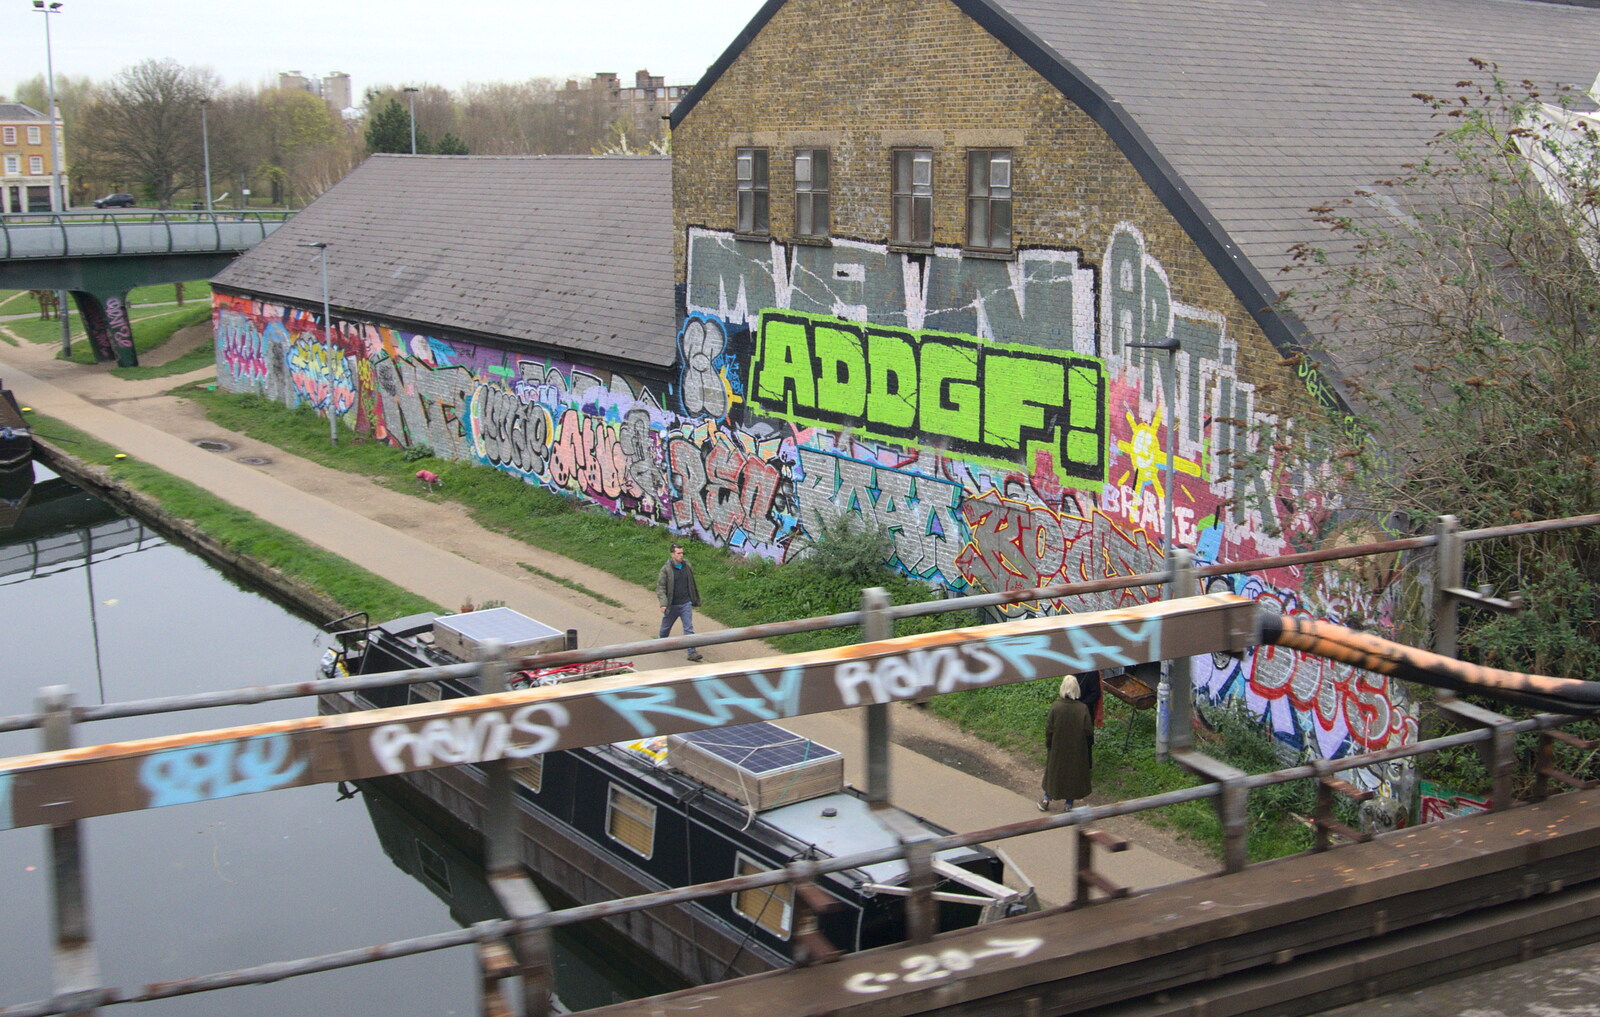 Graffiti down by the Regents Canal from A Team Outing at Namco Funscape, South Bank, London - 27th March 2019